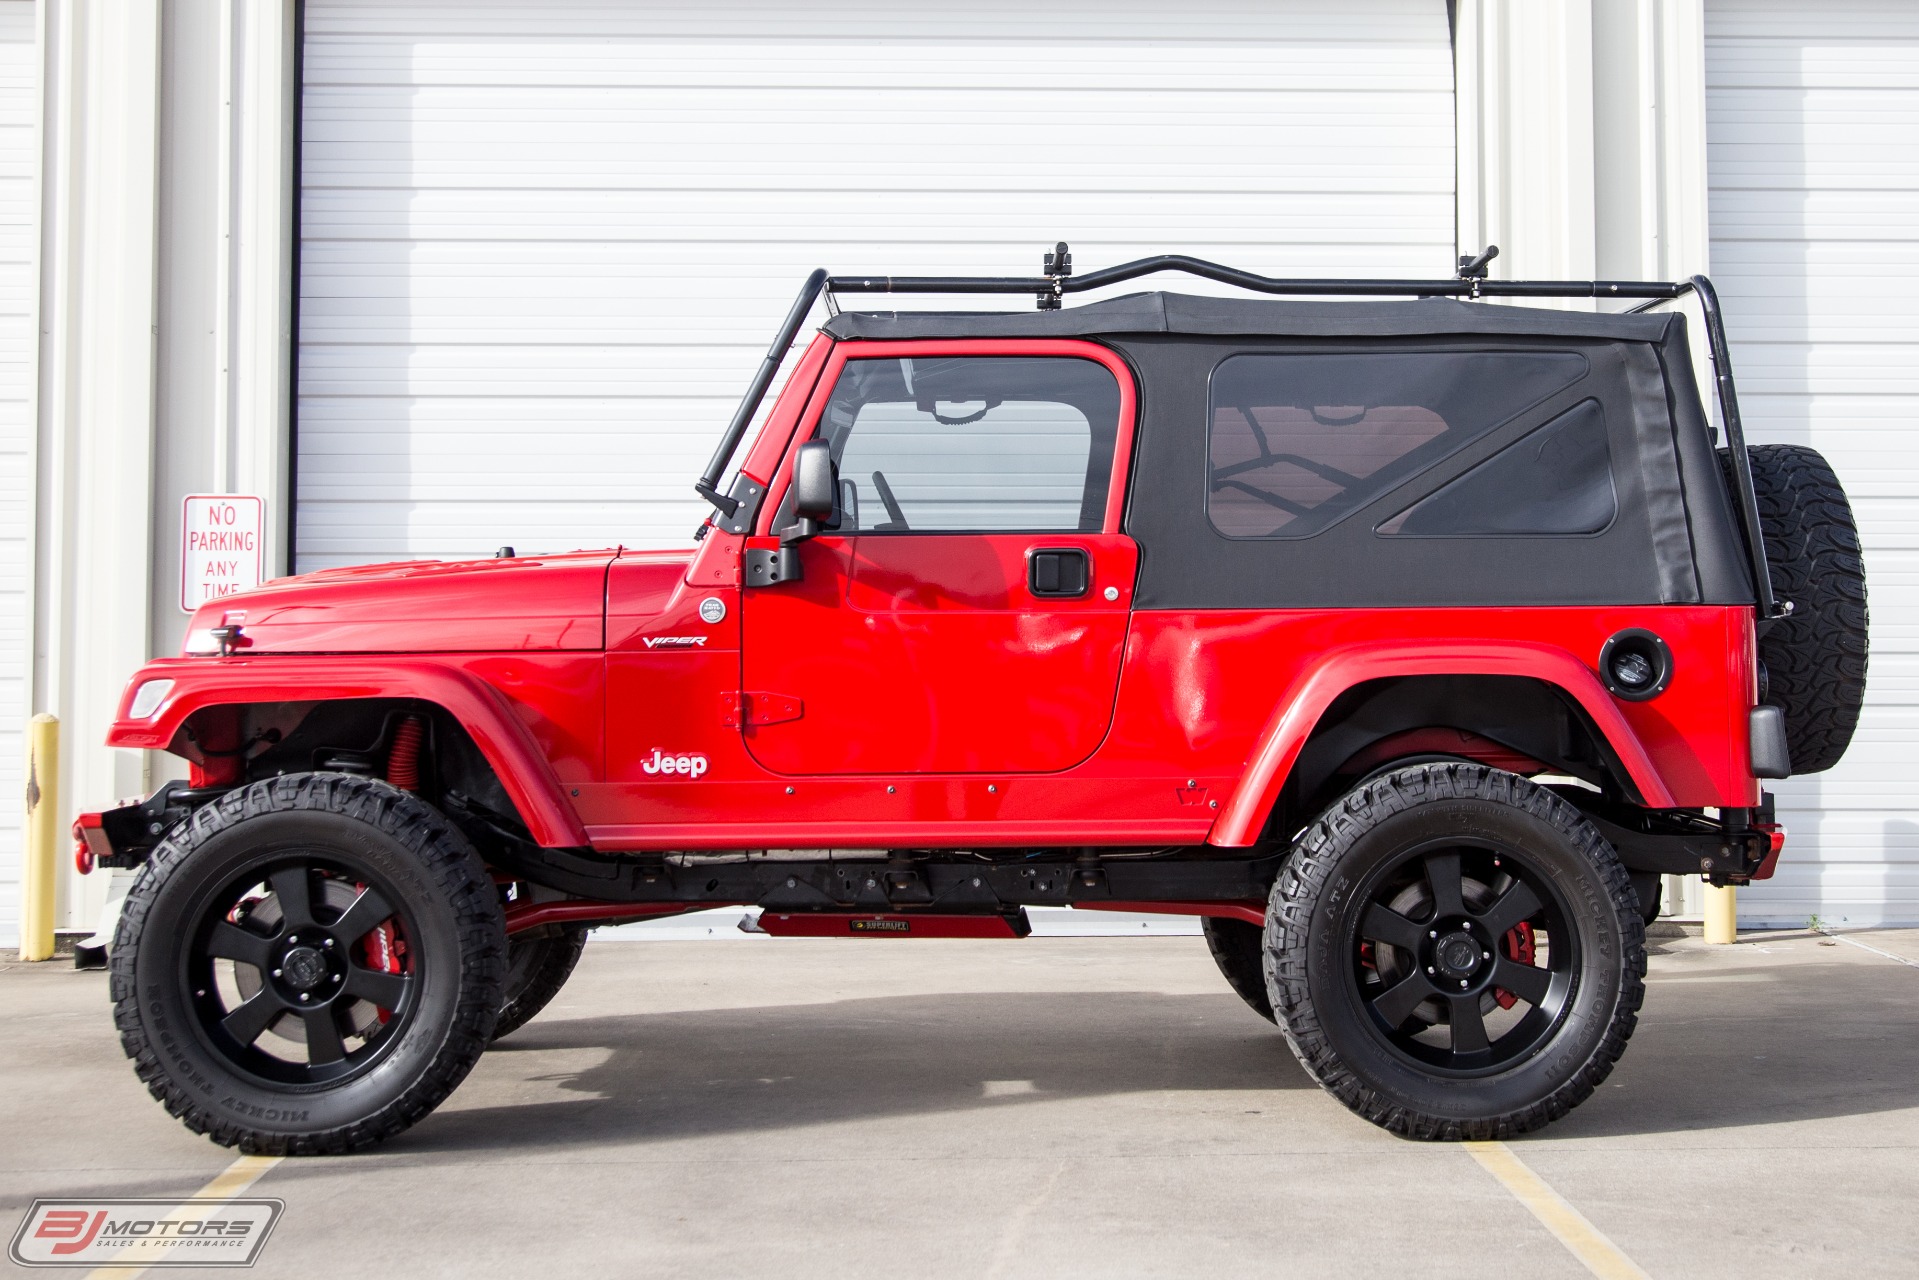 Used 2005 Jeep Wrangler LJ Unlimited Viper For Sale (Special Pricing) | BJ  Motors Stock #5P365101